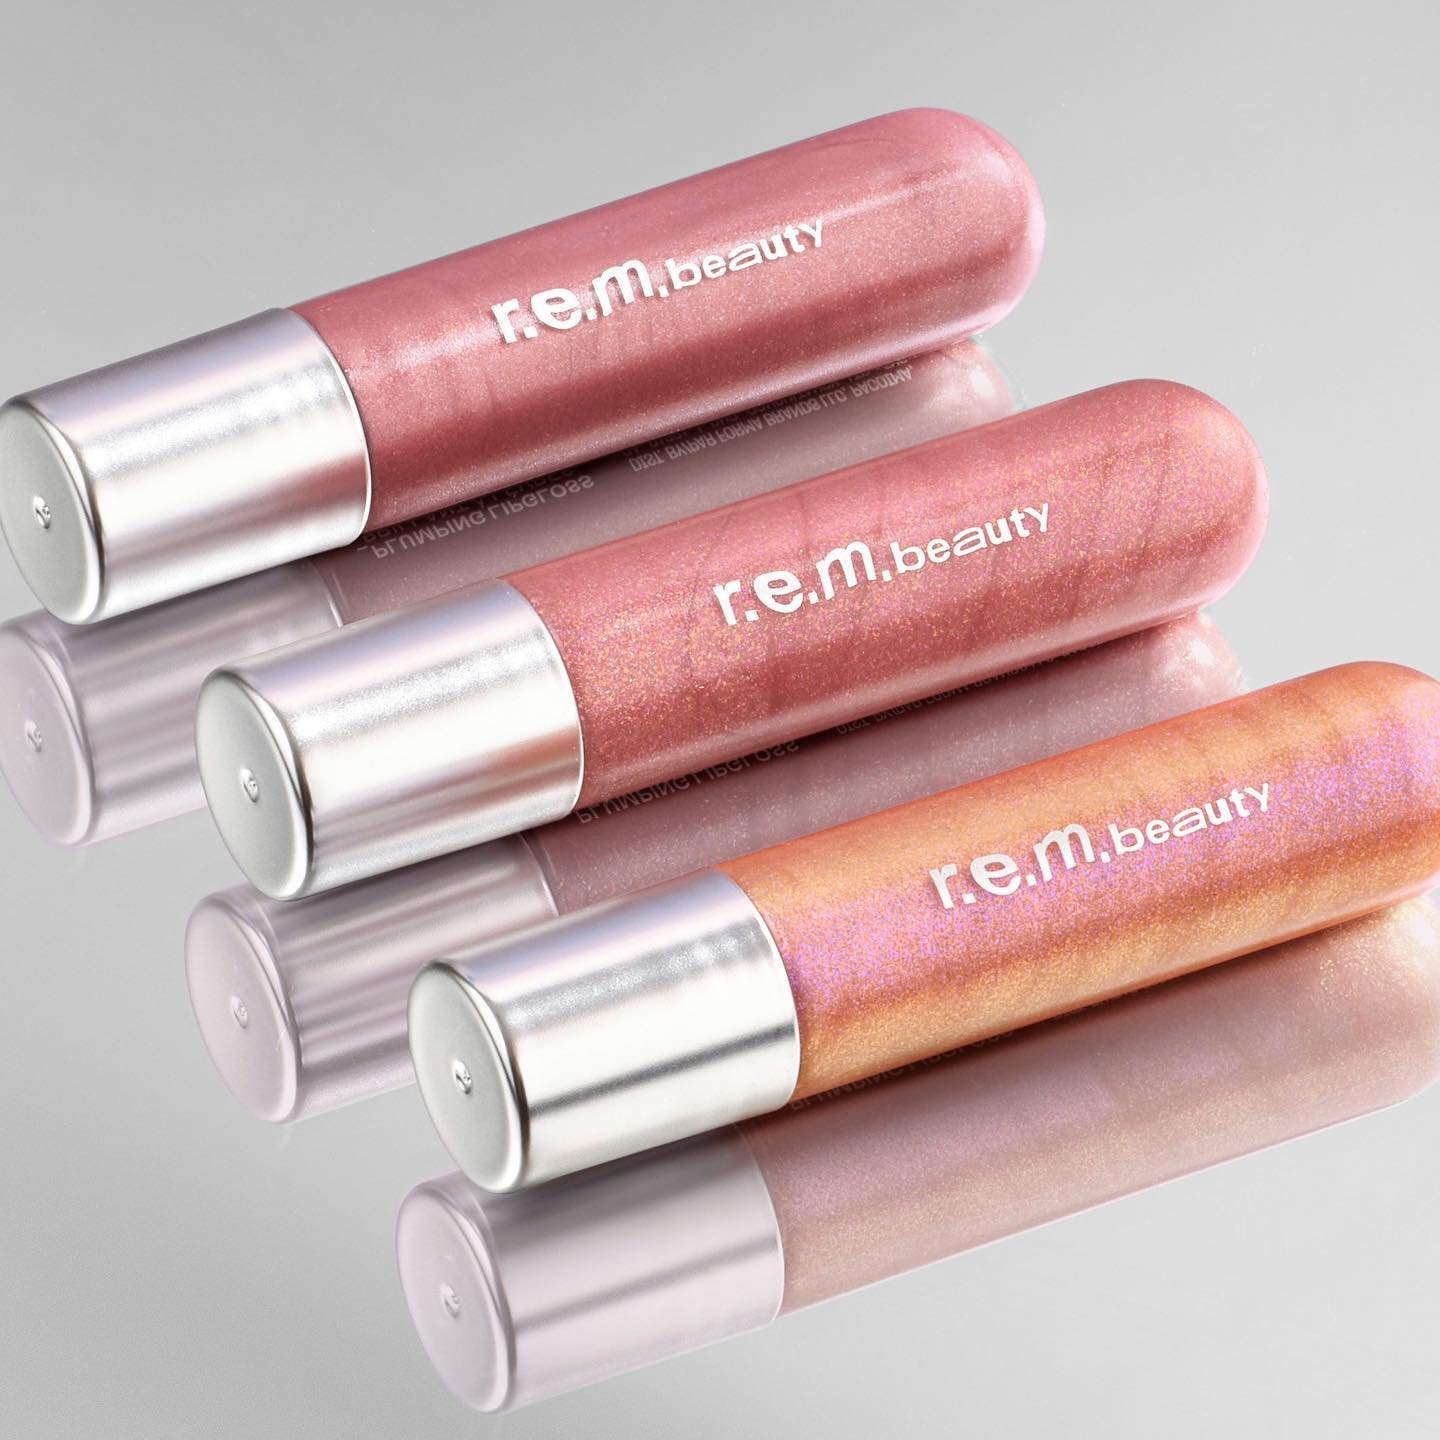 New shades of R.E.M Beauty On Your Collar Plumping Lip Gloss